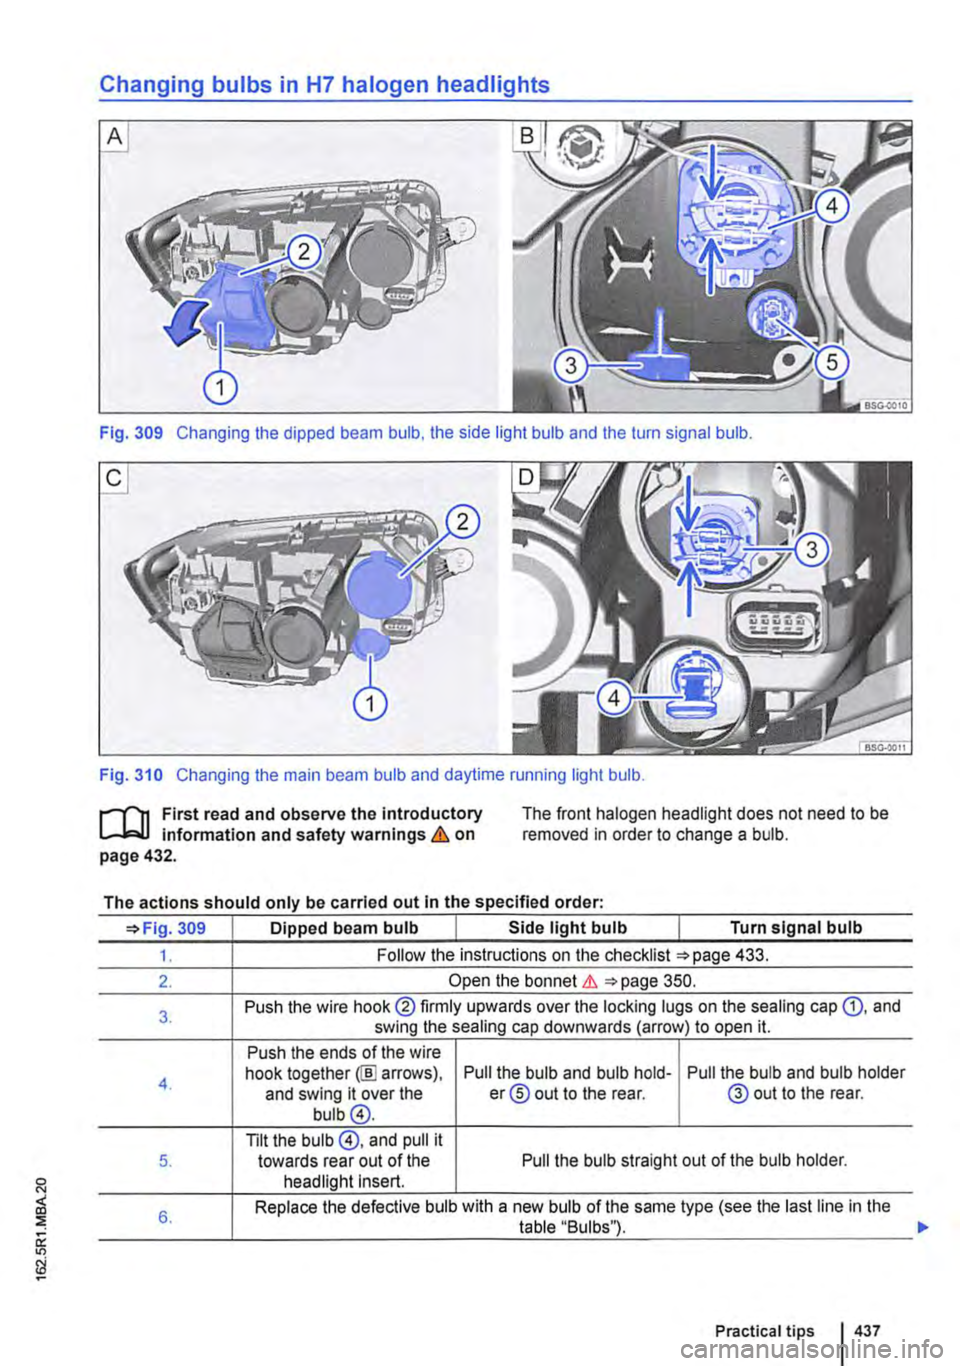 VOLKSWAGEN TRANSPORTER 2010  Owners Manual Changing bulbs in H7 halogen headlights 
Fig. 309 Changing the dipped beam bulb, the side light bulb and the turn signal bulb. 
Fig. 310 Changing the main beam bulb and daytime running light bulb. 
l"